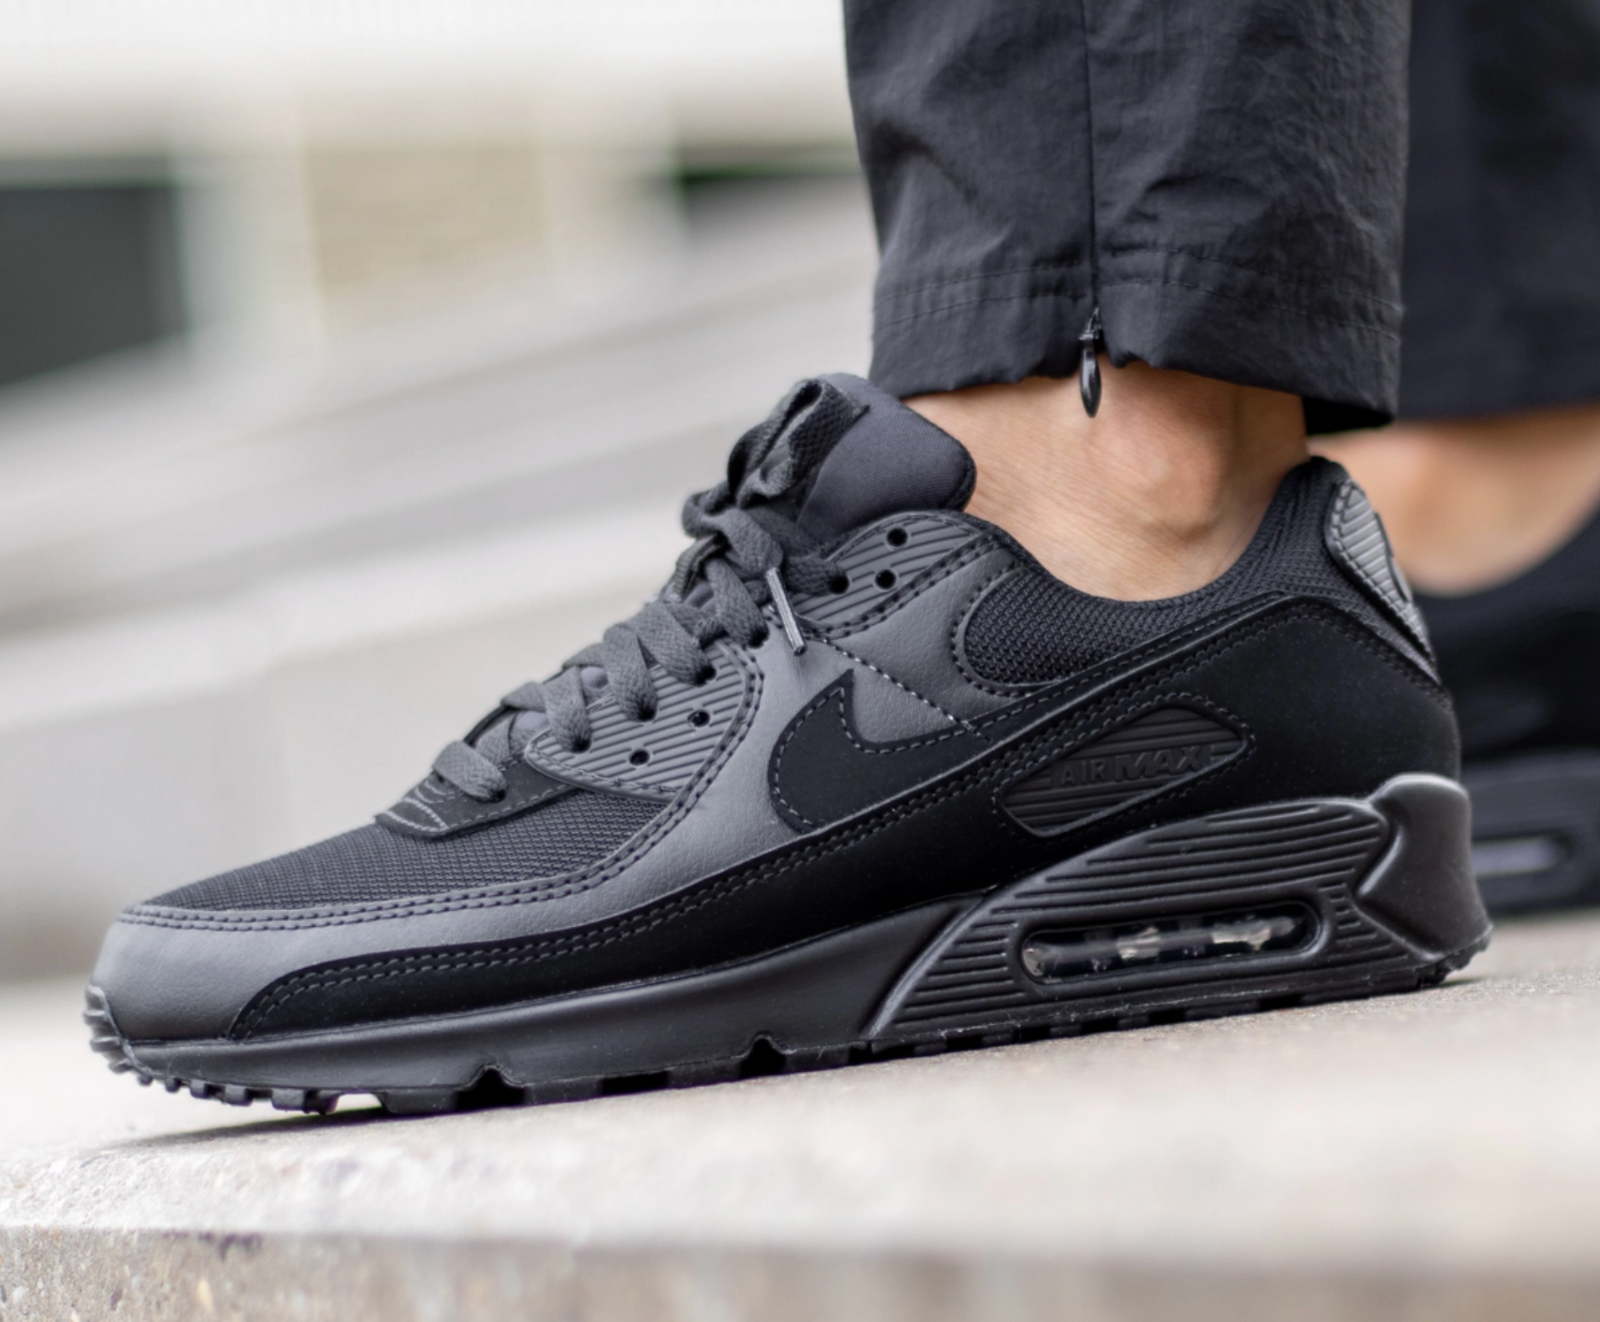 Toestand Beheer Diversen New NIKE Air Max 90 Men's classic Athletic Sneakers shoes triple black all  sizes | eBay